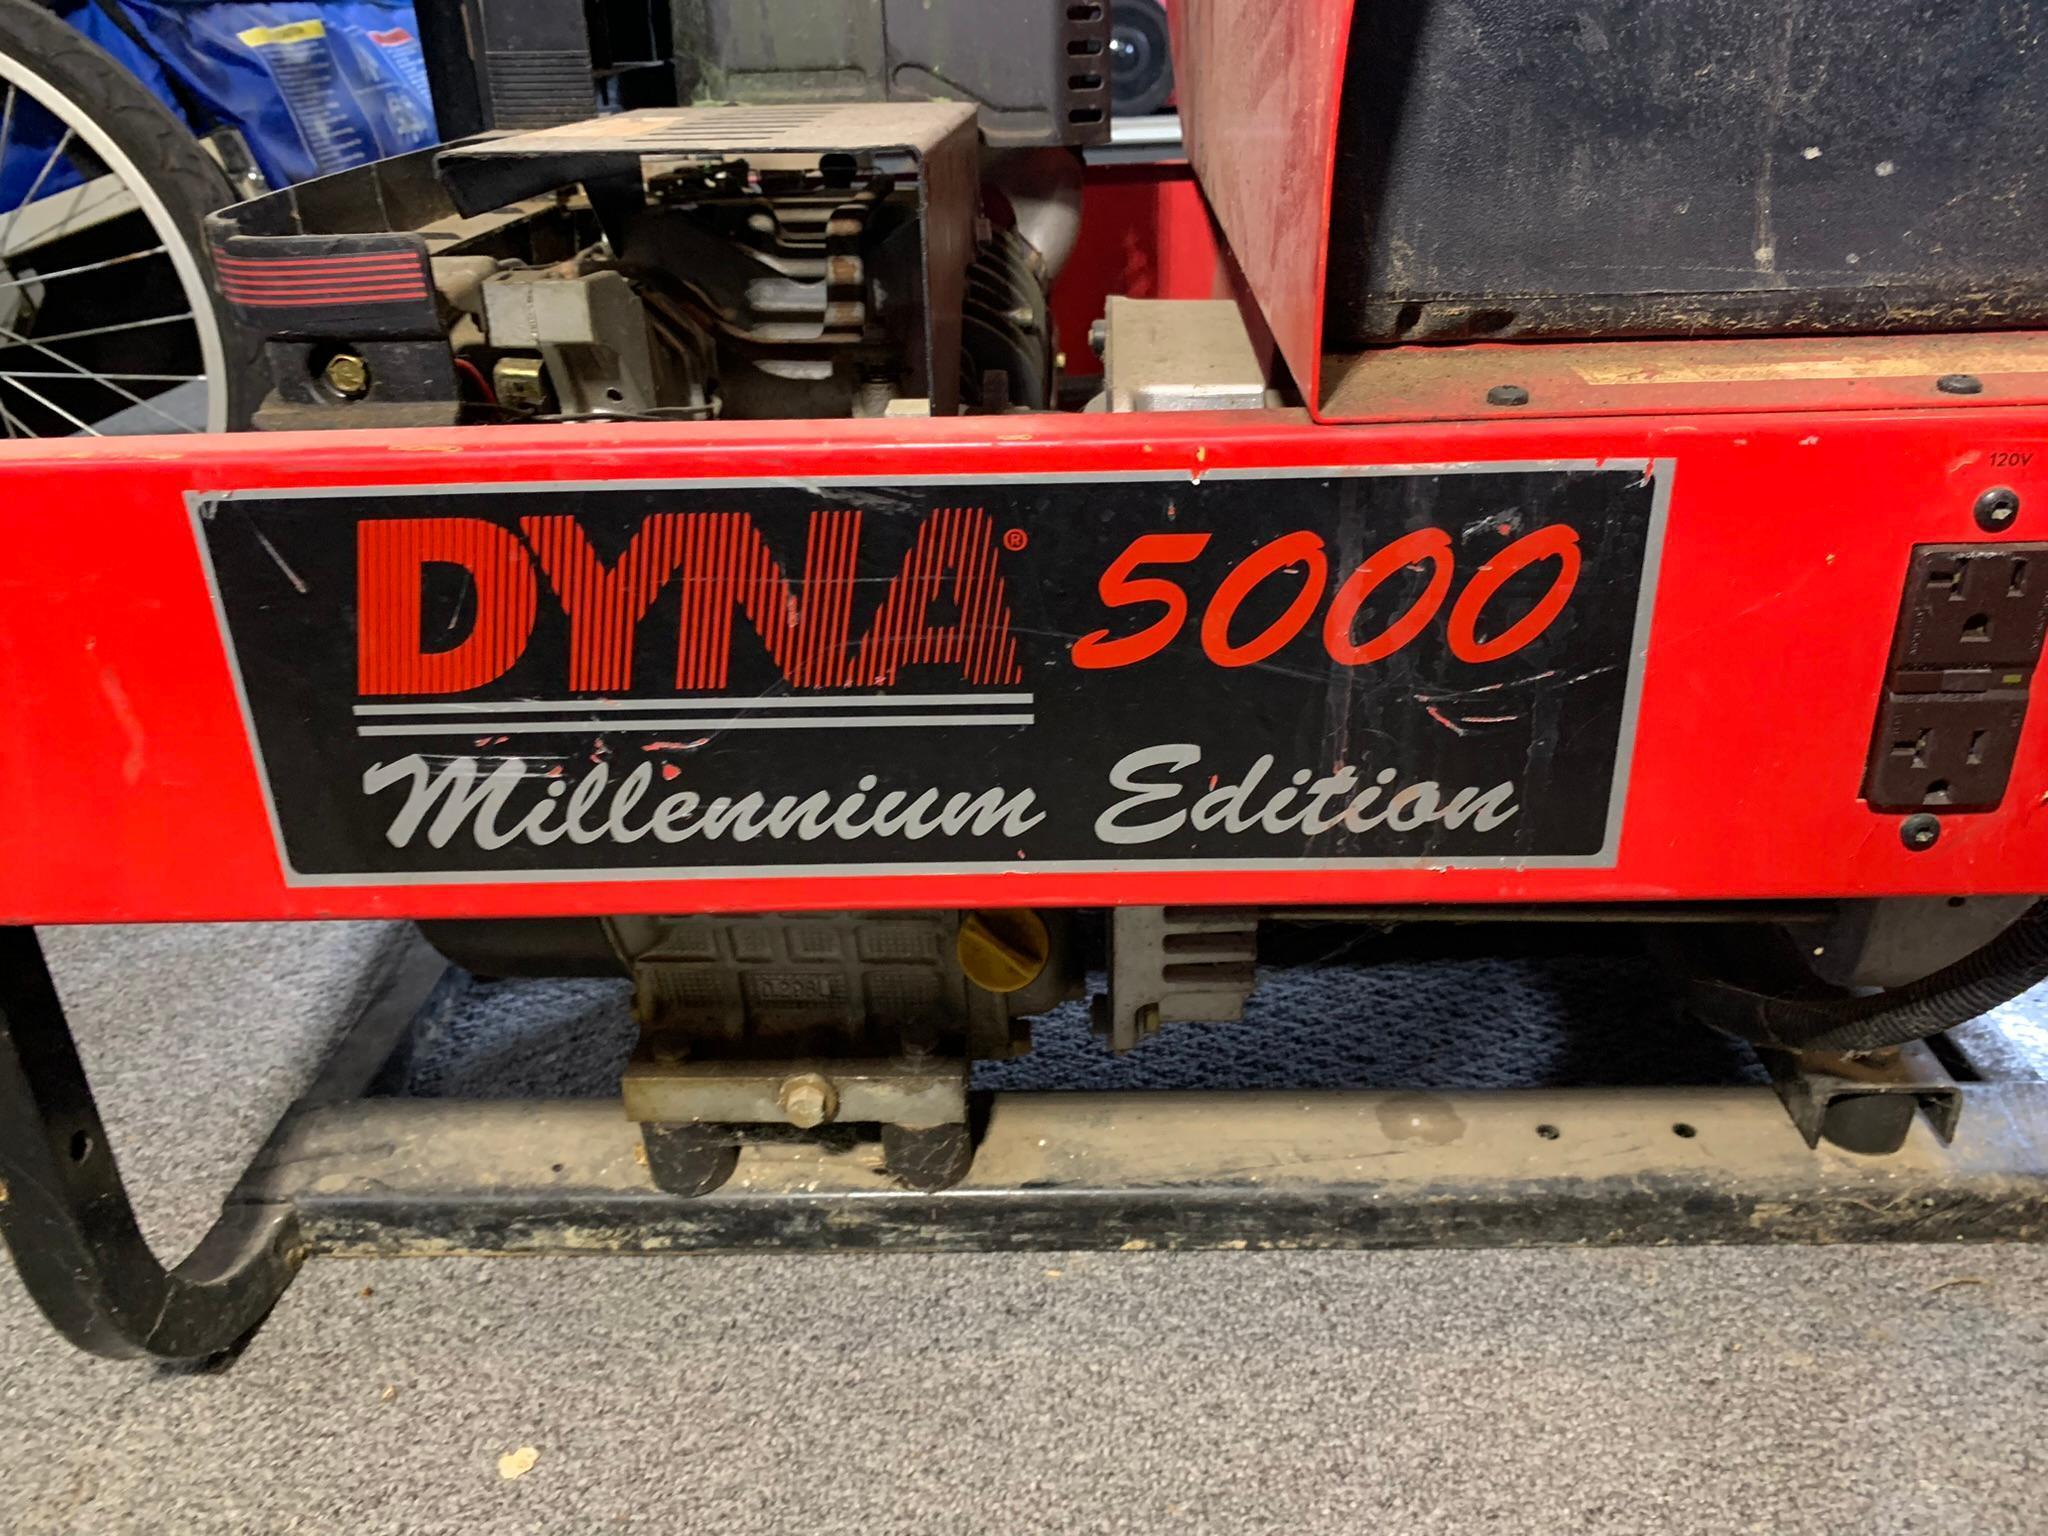 Dyna 5000 Millennium Edition Generator Made by Winco Co.